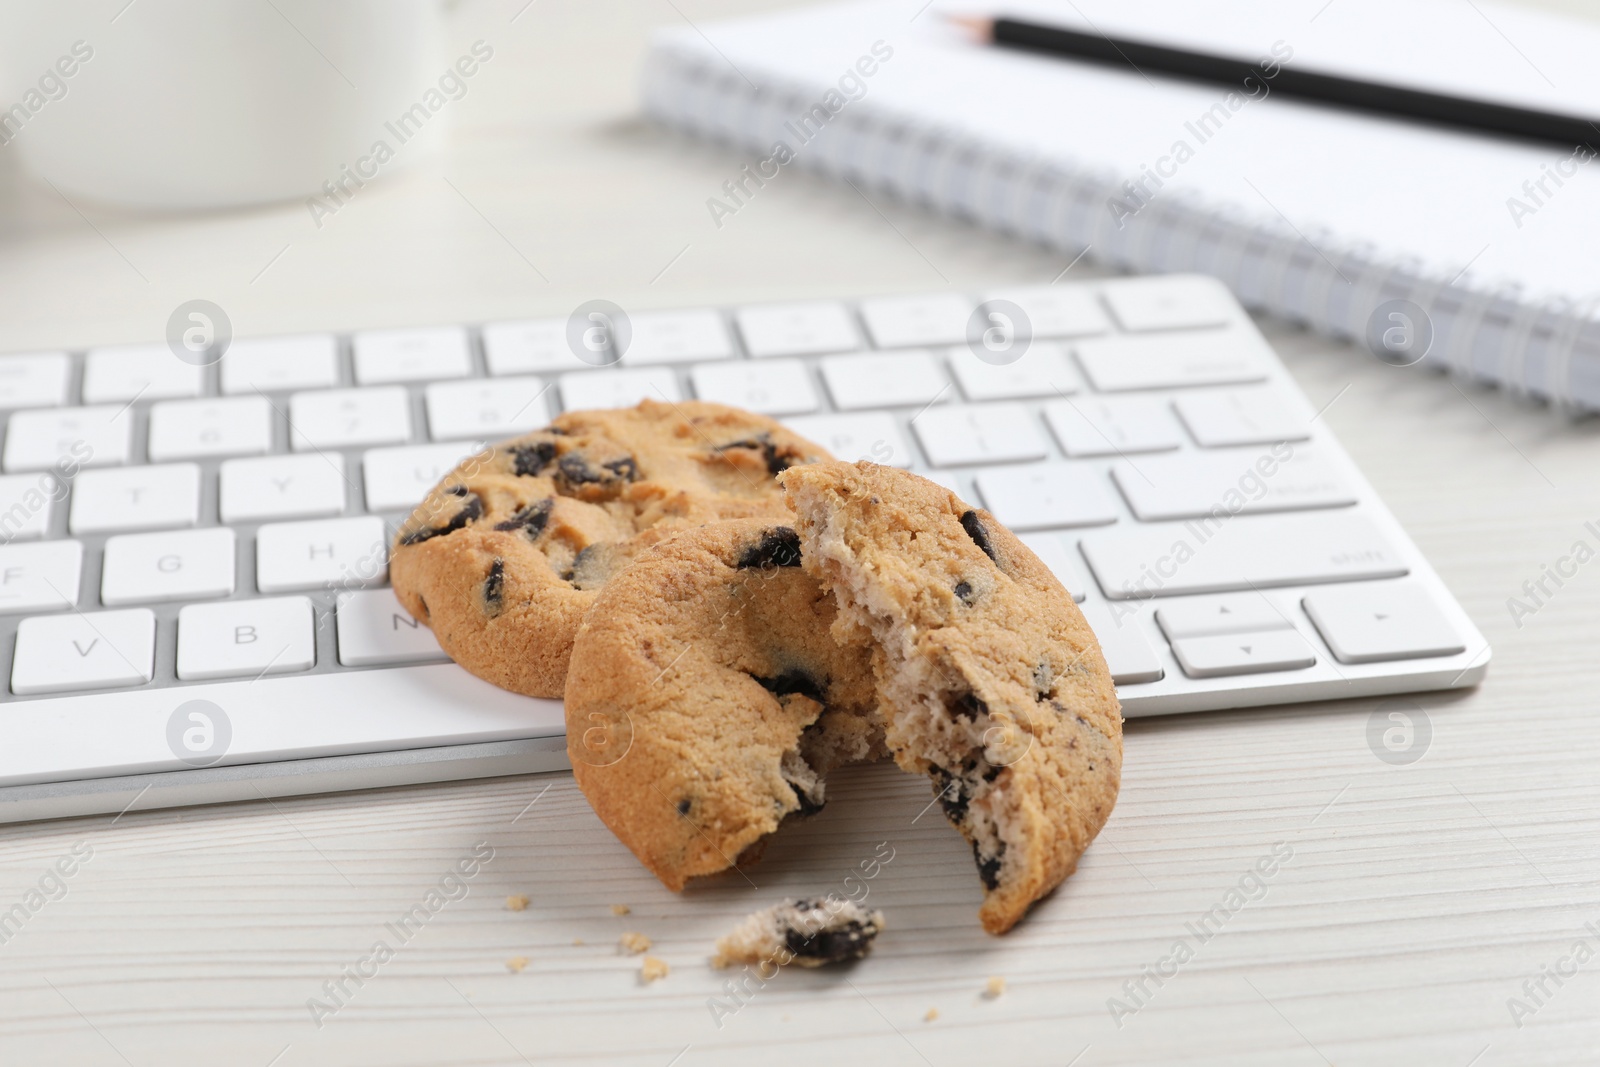 Photo of Chocolate chip cookies and keyboard on white wooden table, closeup